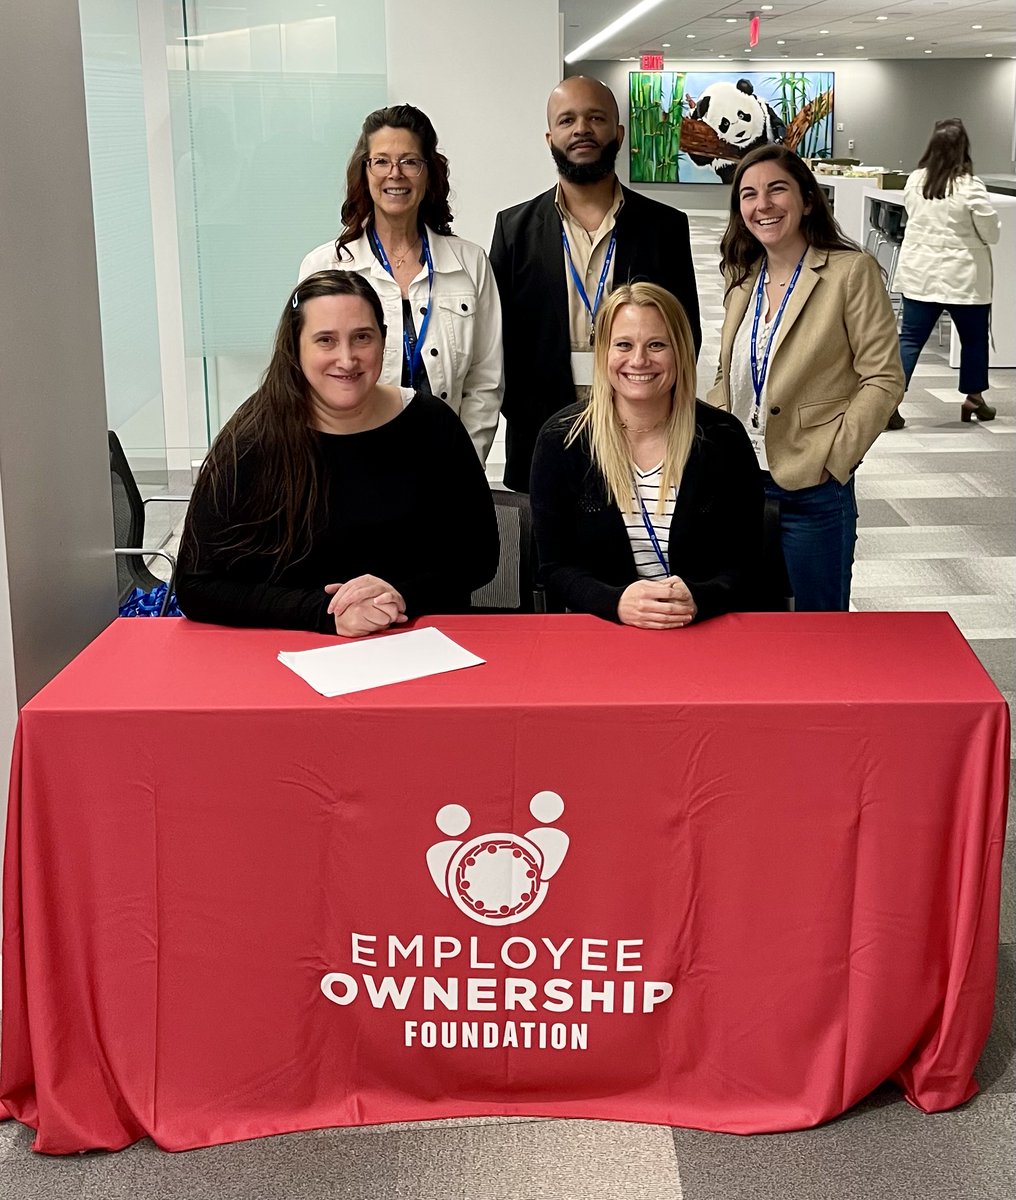 Our employee-owners had a great time attending the ESOP Employee Accelerator program at the ESOP Association’s HQ in Washington, DC. Thank you to the Employee Ownership Foundation for hosting such an insightful and fun day! 

#DCSCorp #EmployeeOwners #EmployeeOwned #ESOP